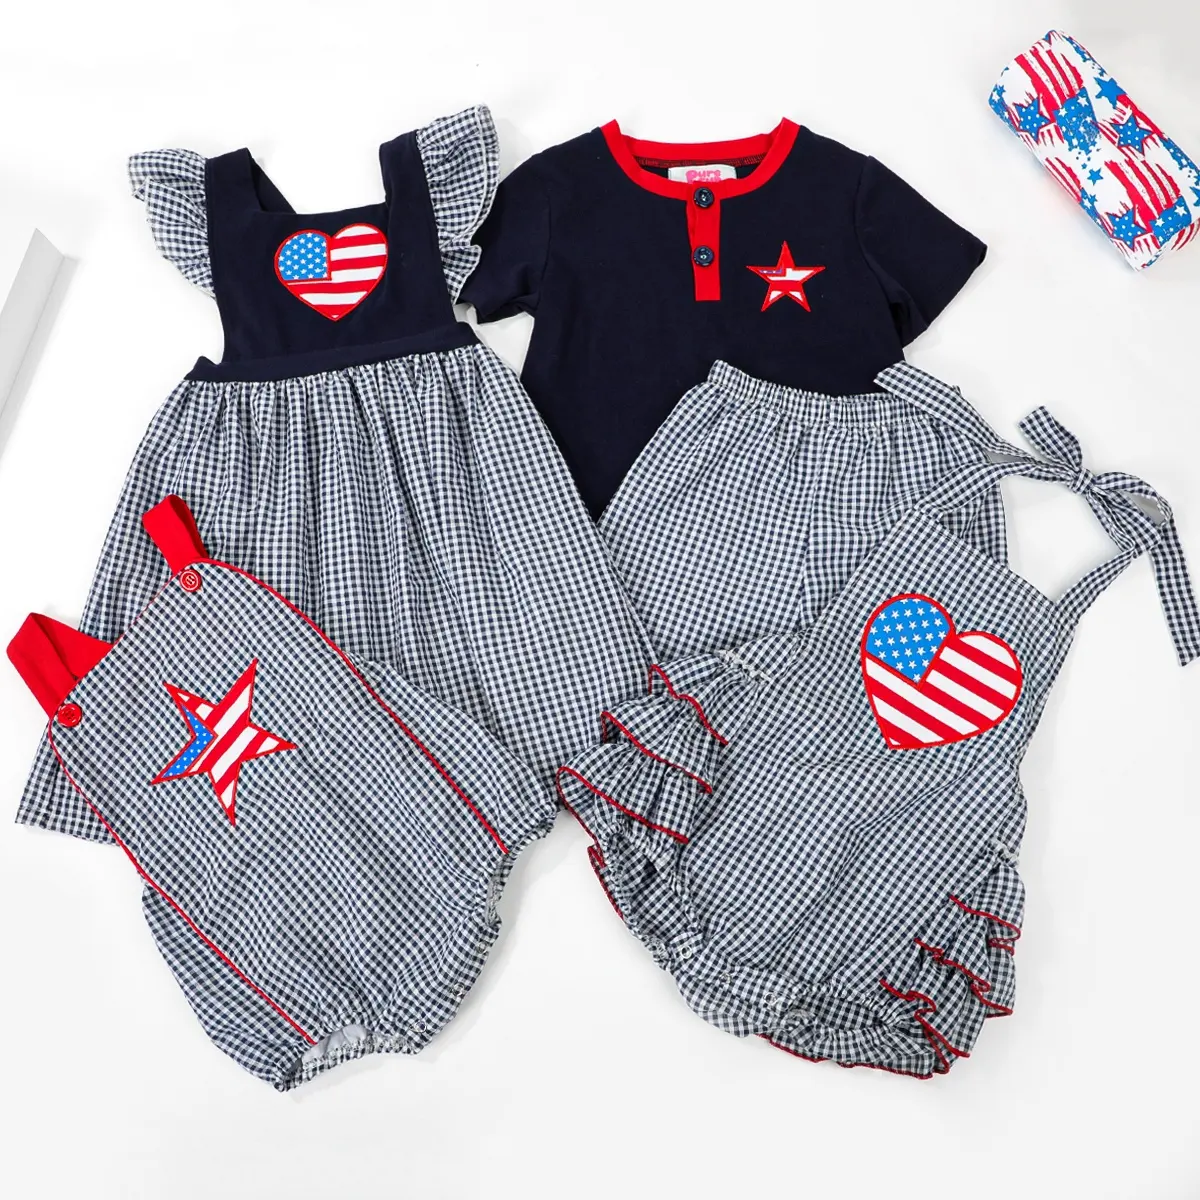 USA flag smocked sibling matching outfits kids boys girls patriotic applique custom clothing 4th of july toddler clothes